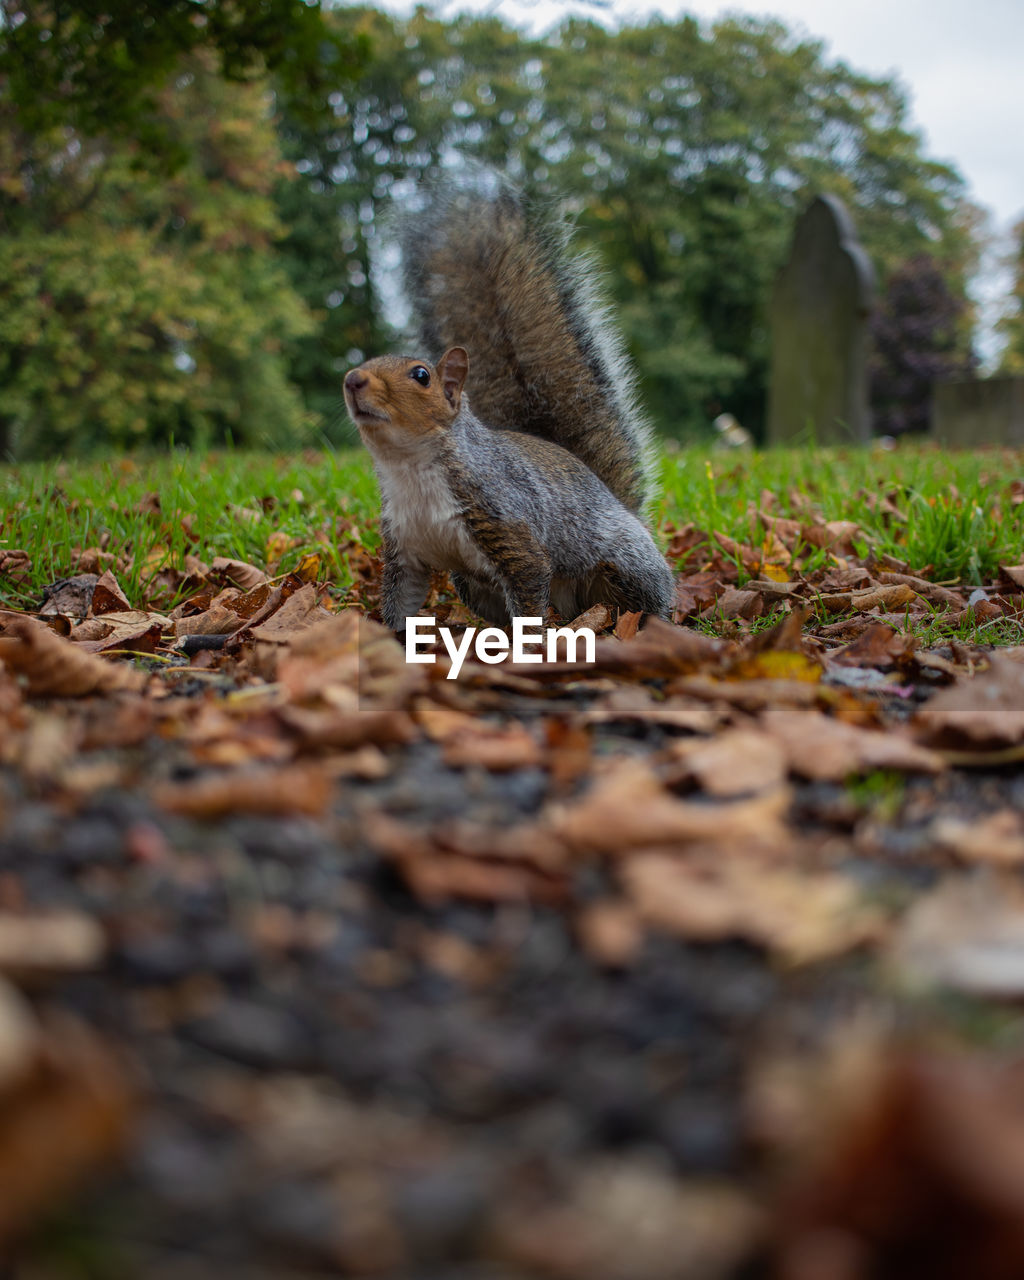 View of squirrel on land looking curious during autumn 